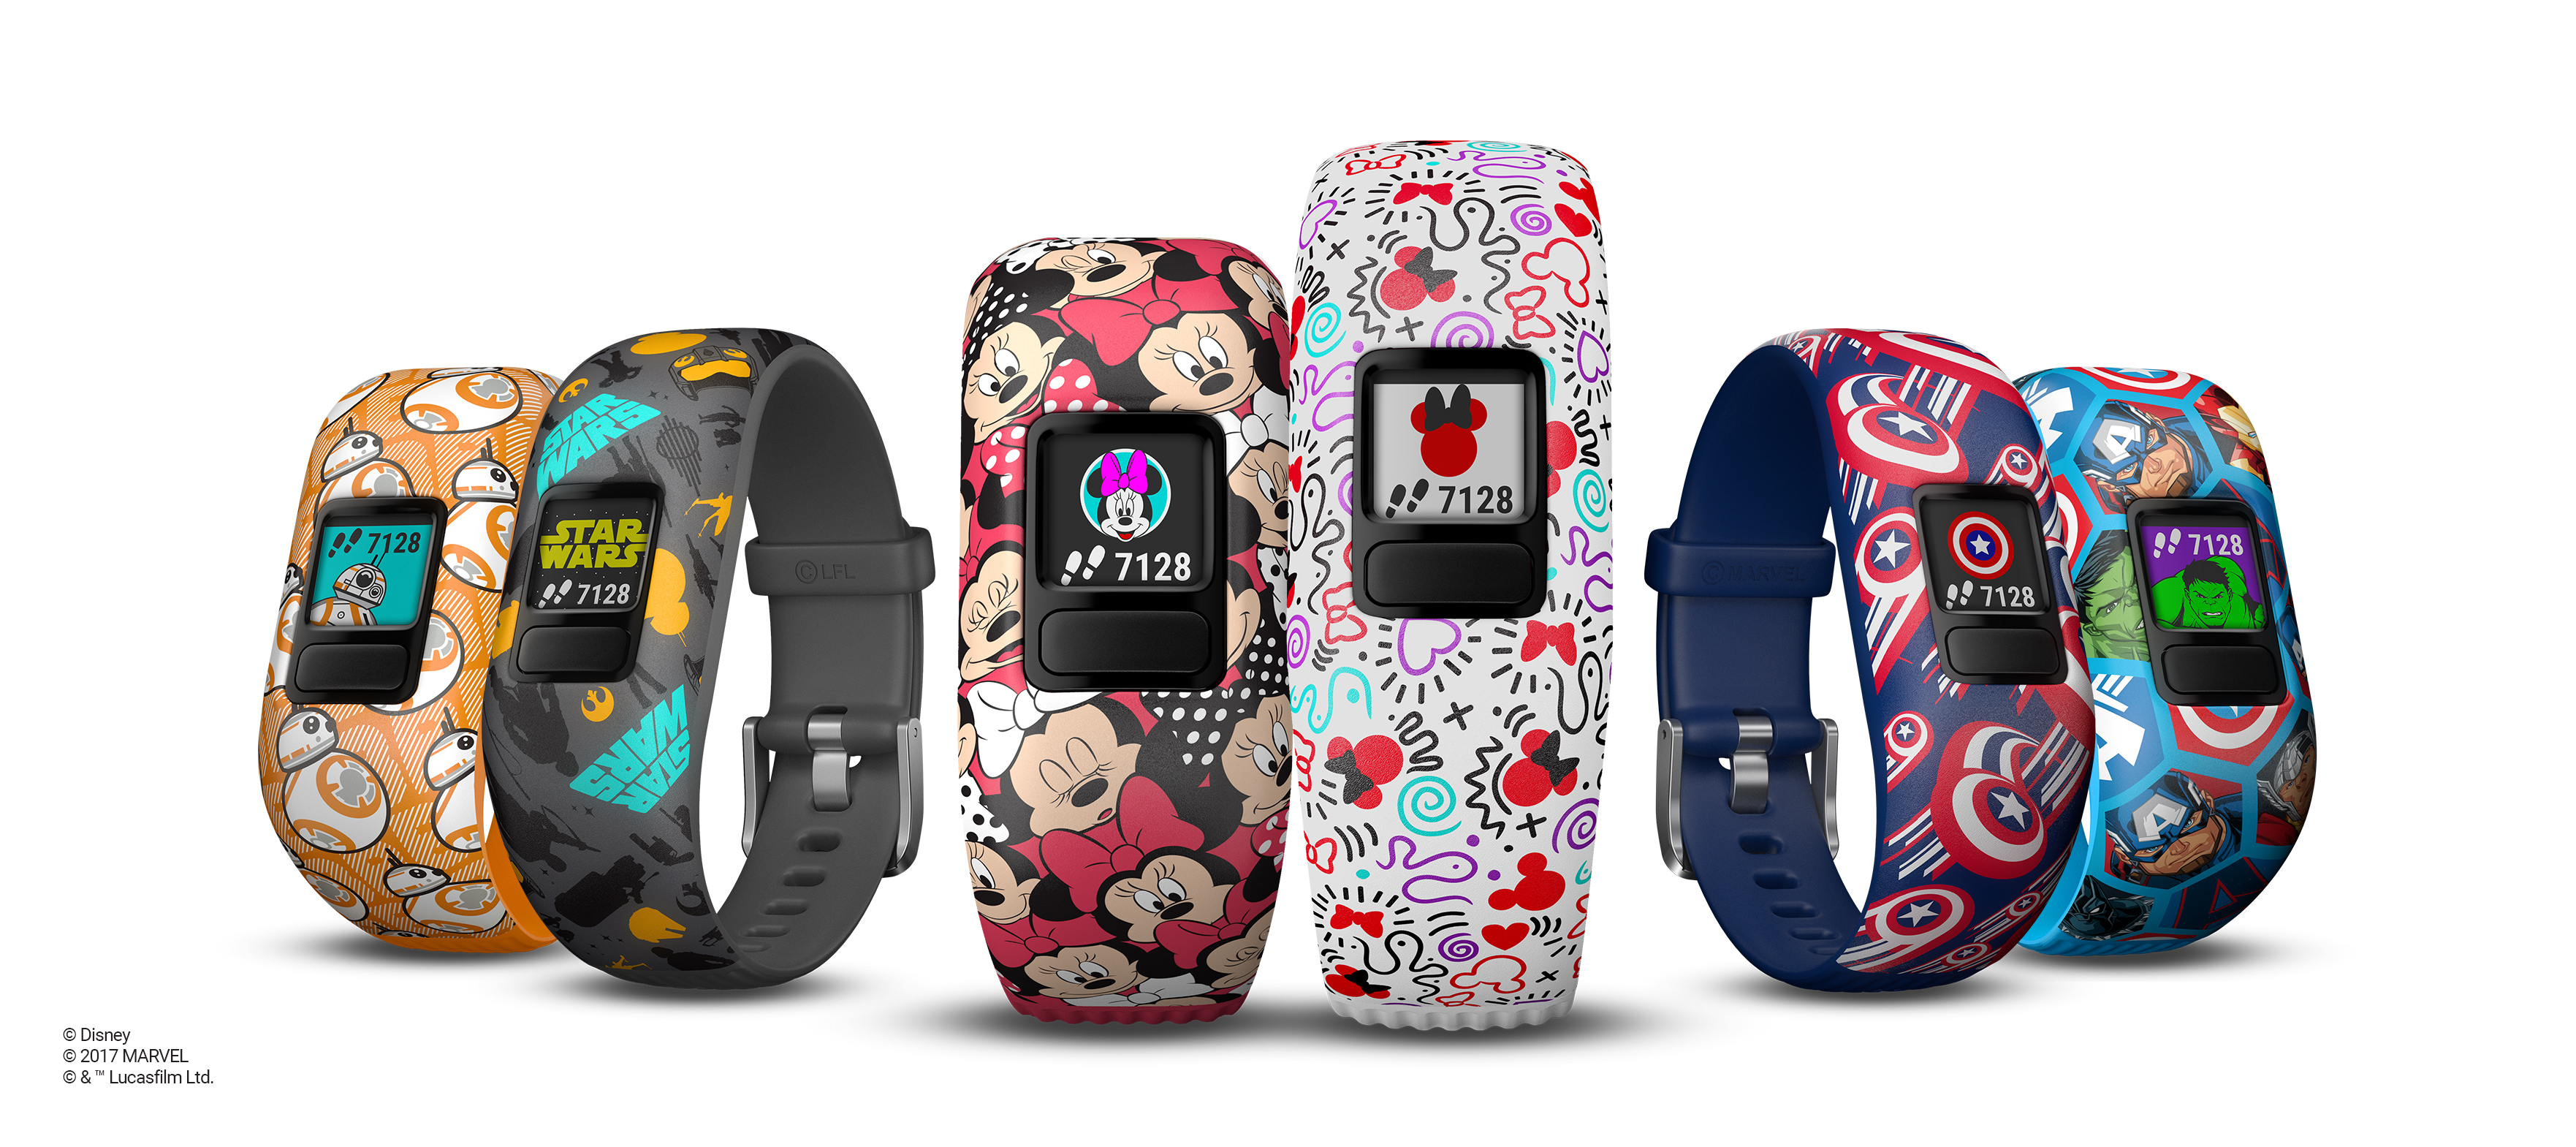 Garmin® and Disney bring motivation imagination to the playground with the introduction of the vívofit® jr. 2 activity tracker for kids featuring Disney, Wars and Marvel | Garmin Blog